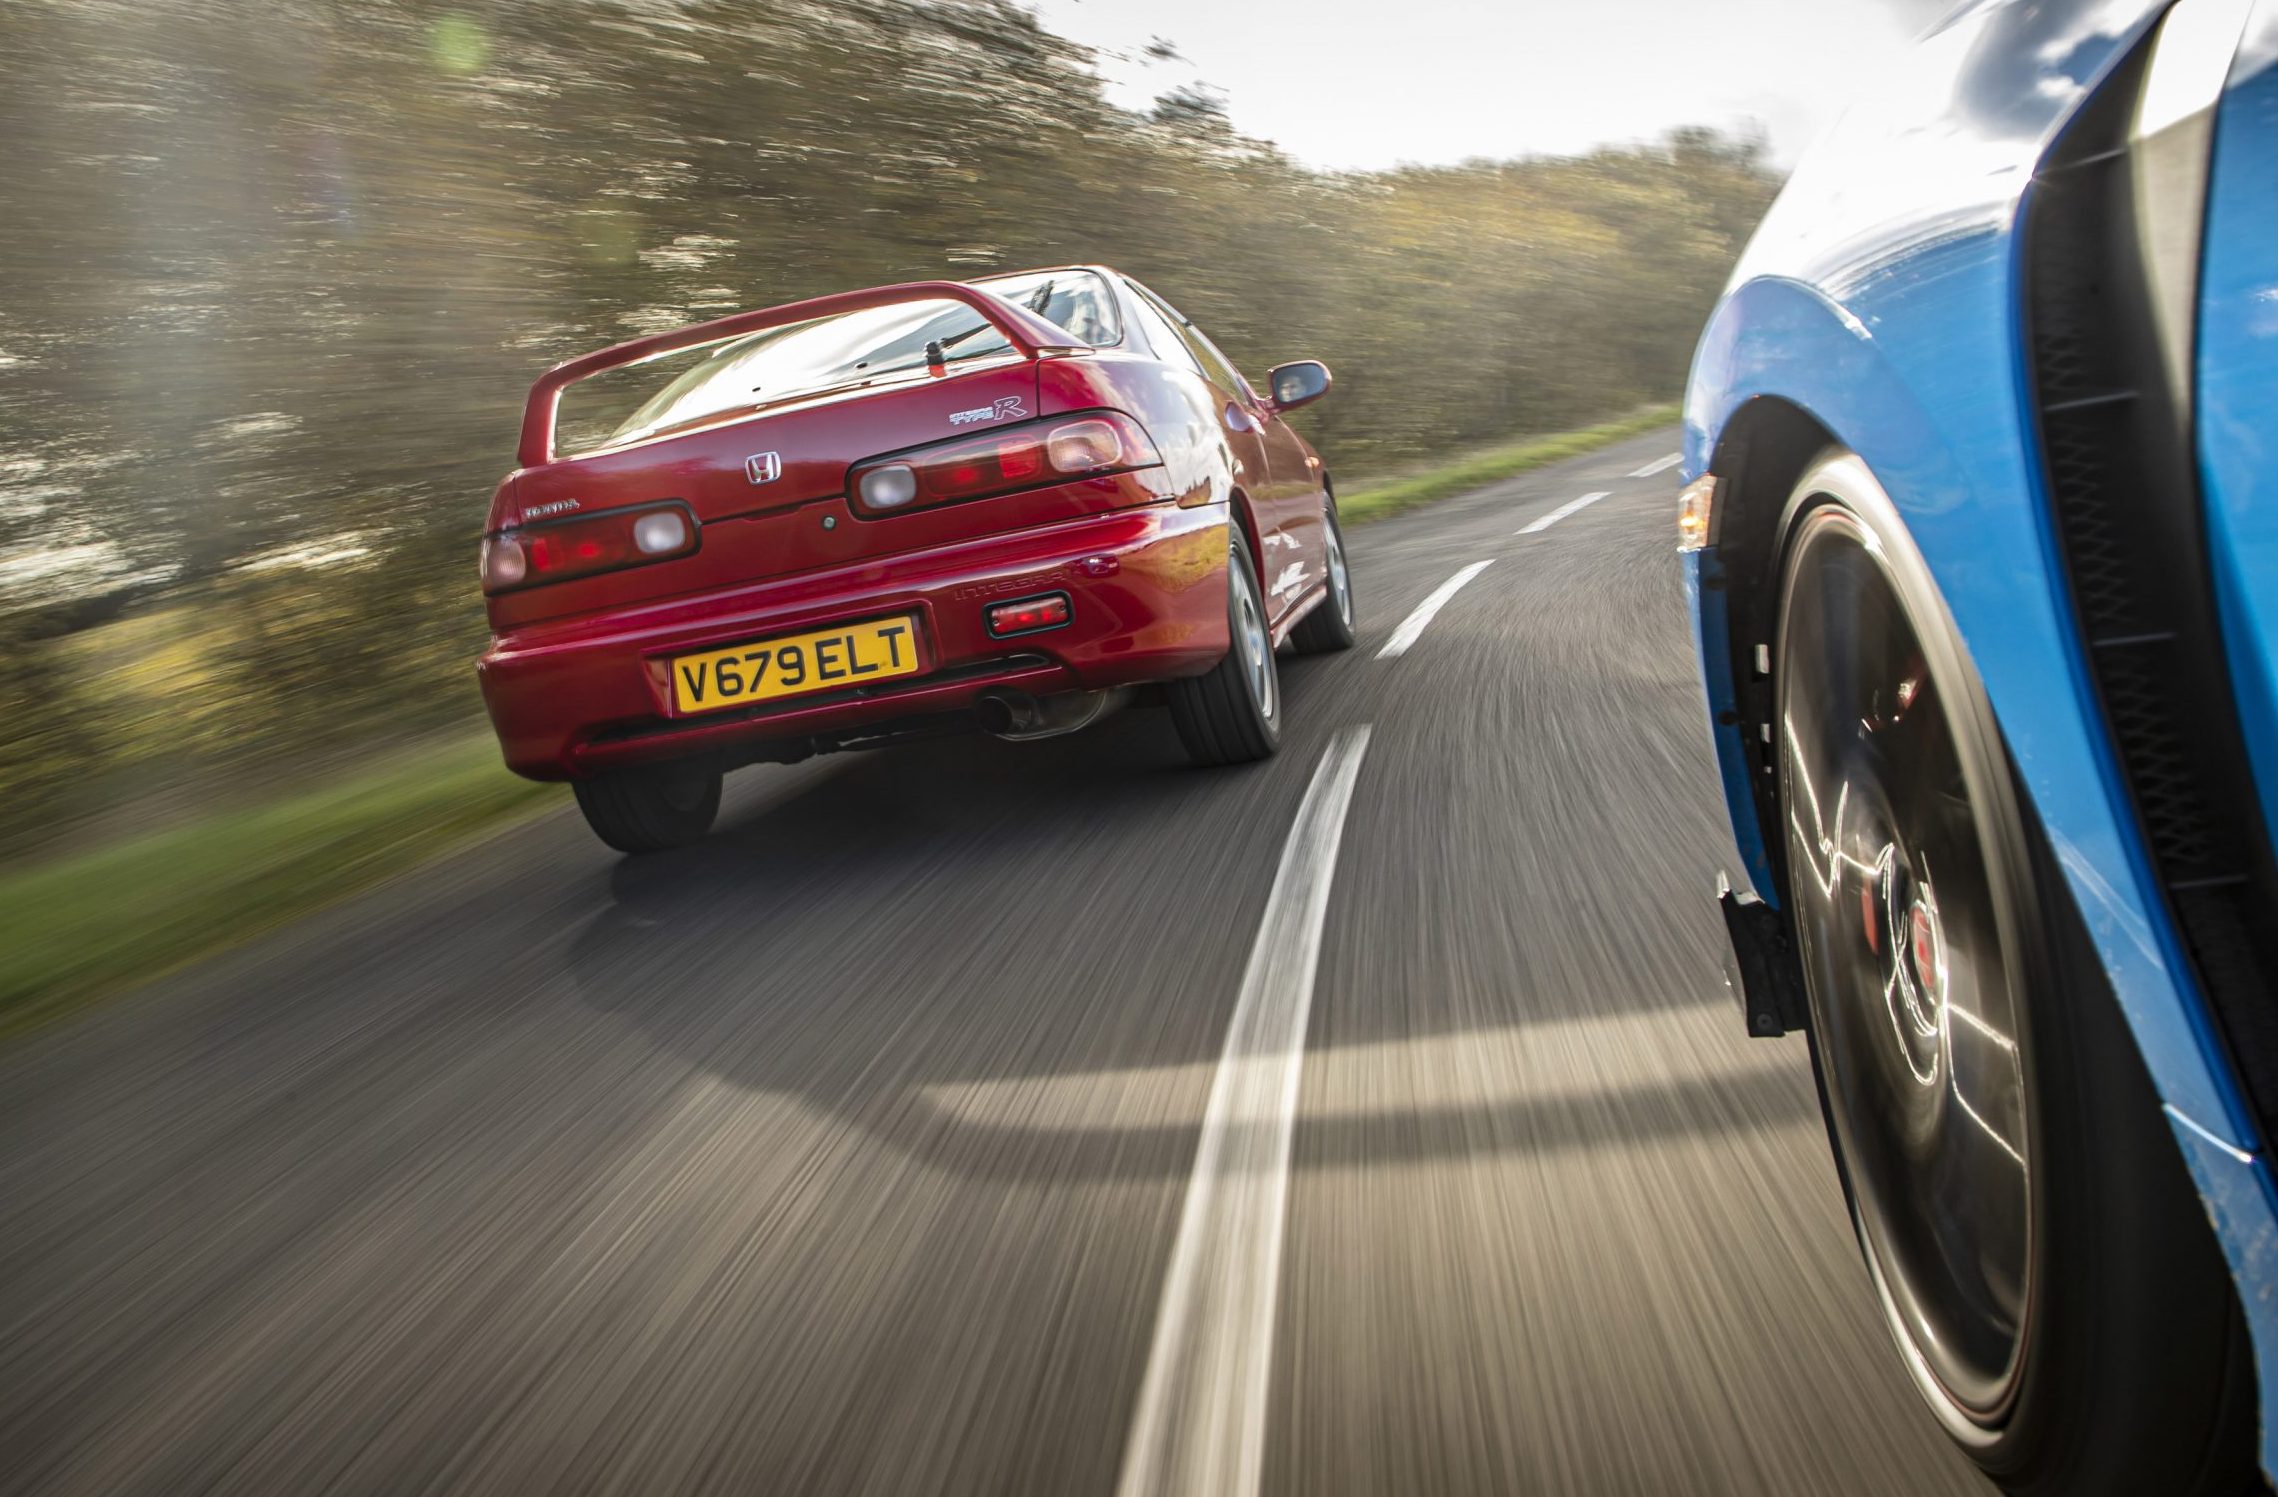 Take your pick of 30 years of Honda's Type-R cars